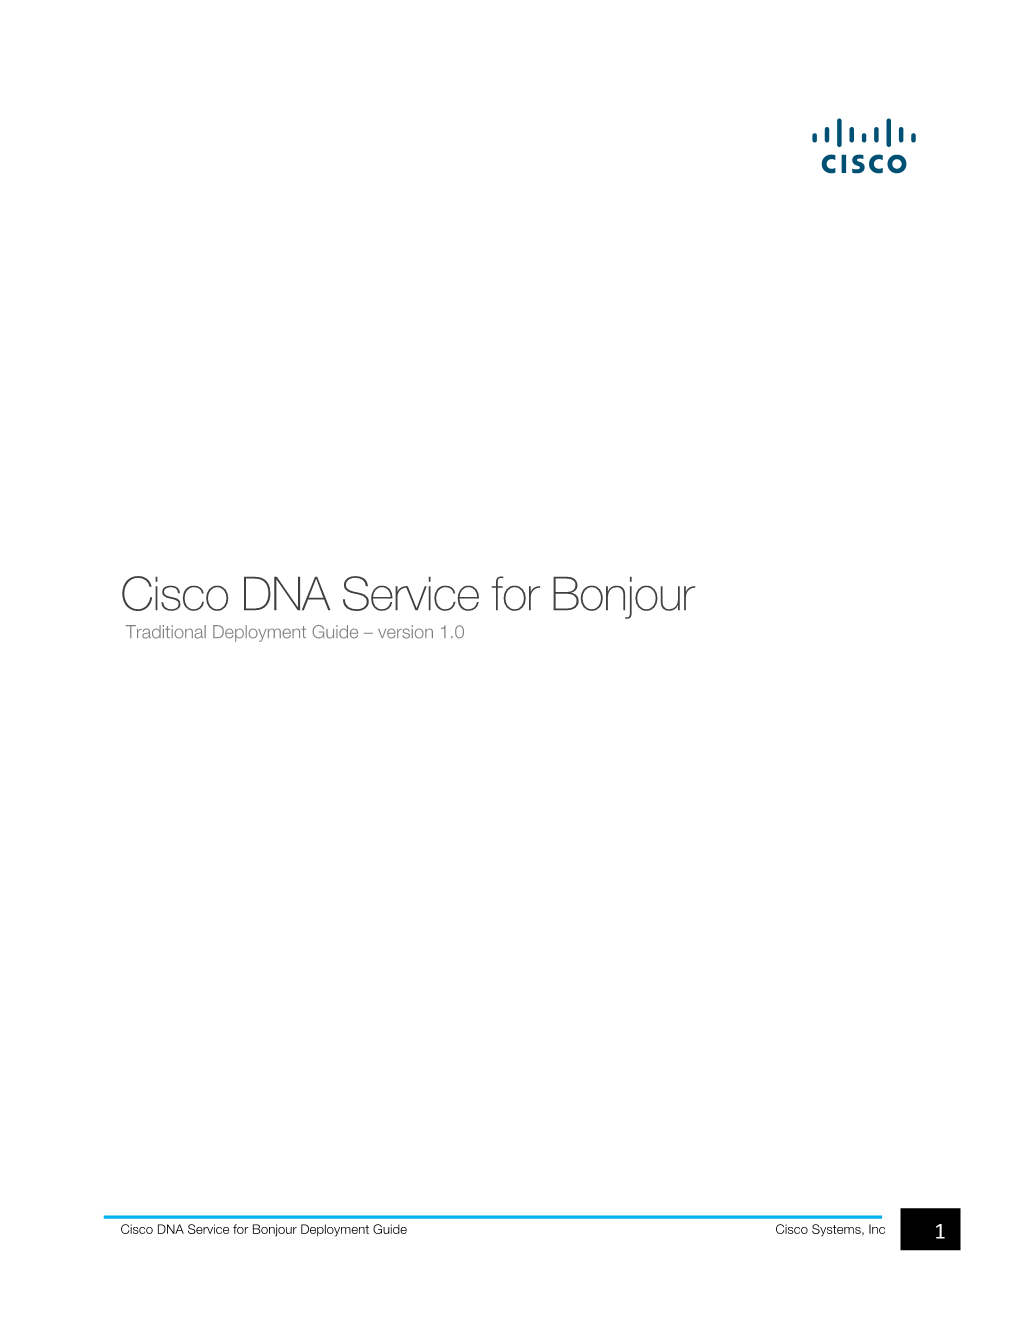 Cisco DNA Service for Bonjour Deployment Guide Cisco Systems, Inc 1 Table of Contents